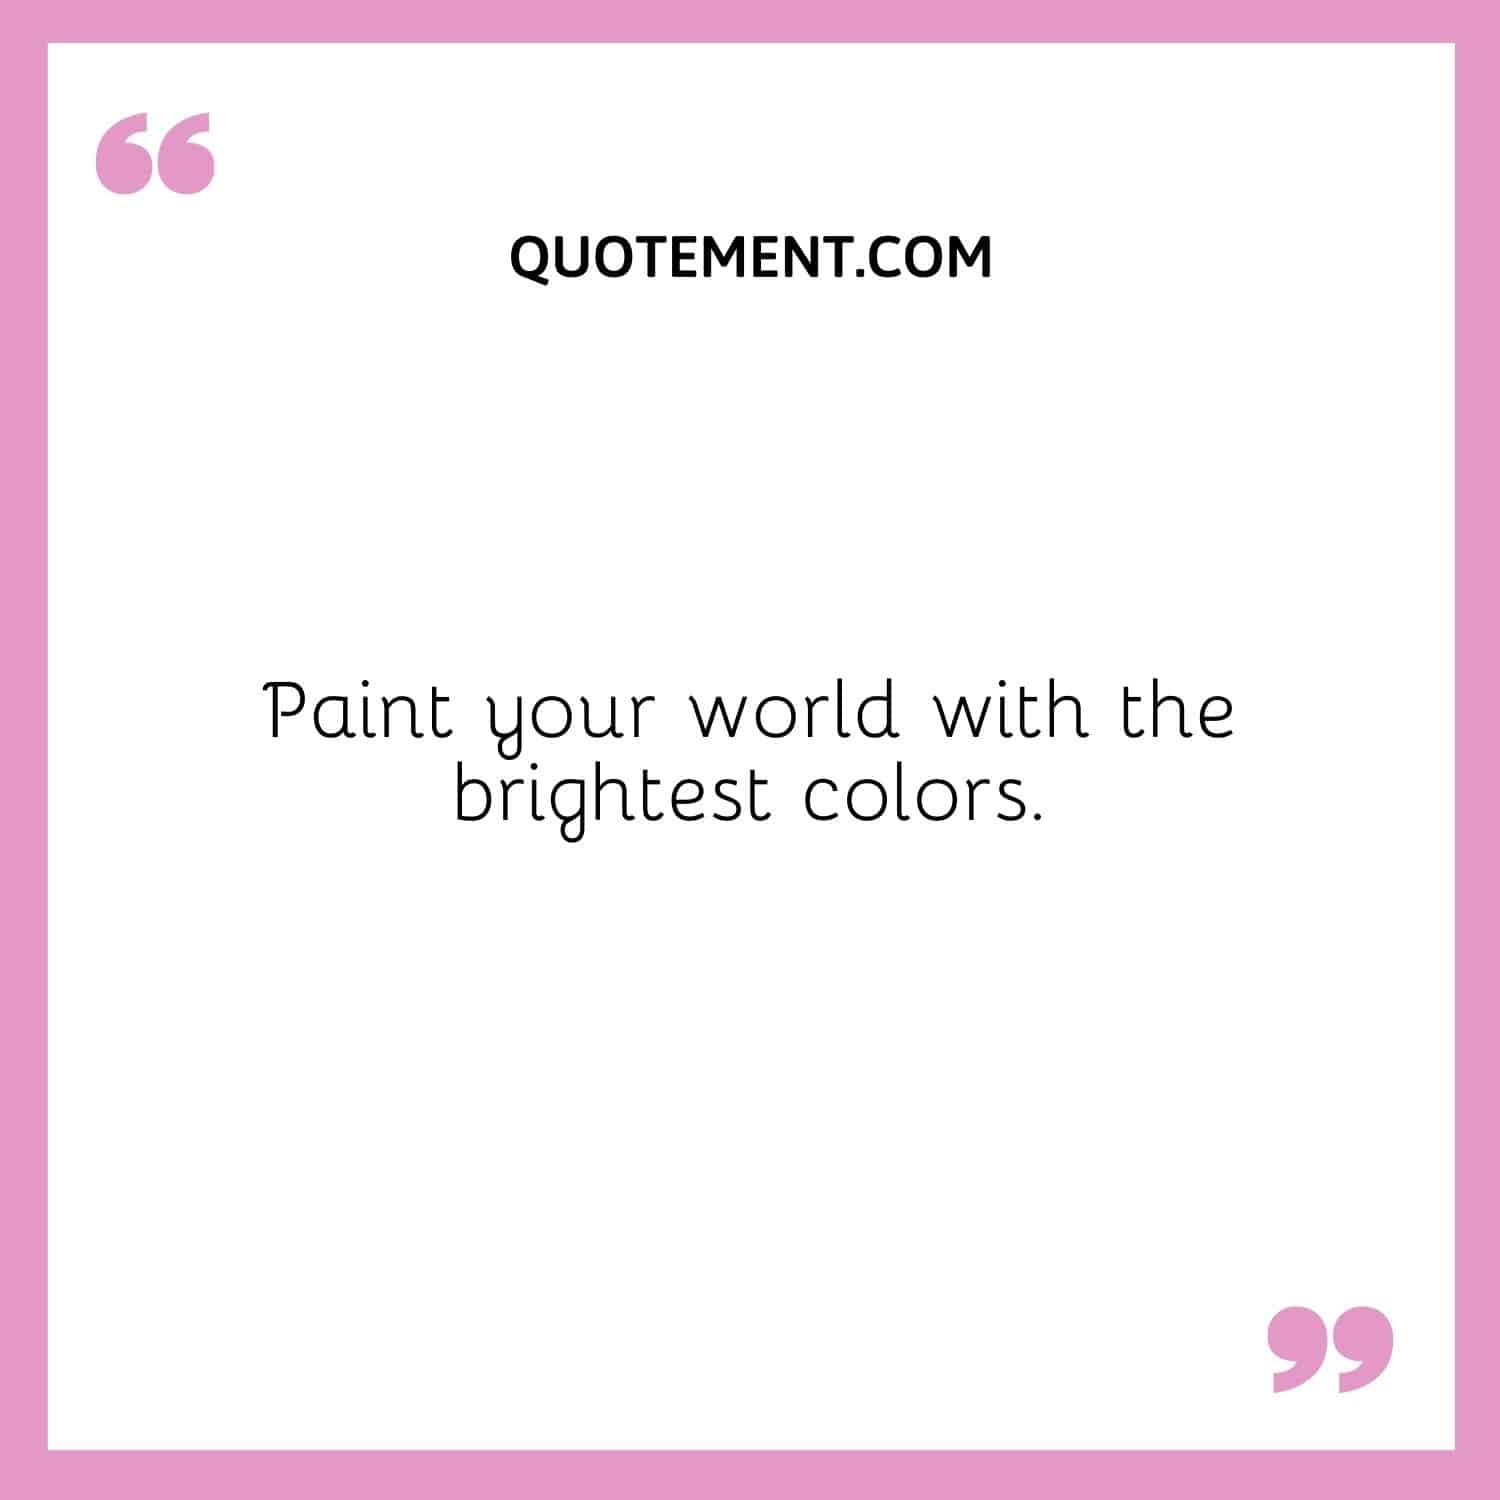 Paint your world with the brightest colors.